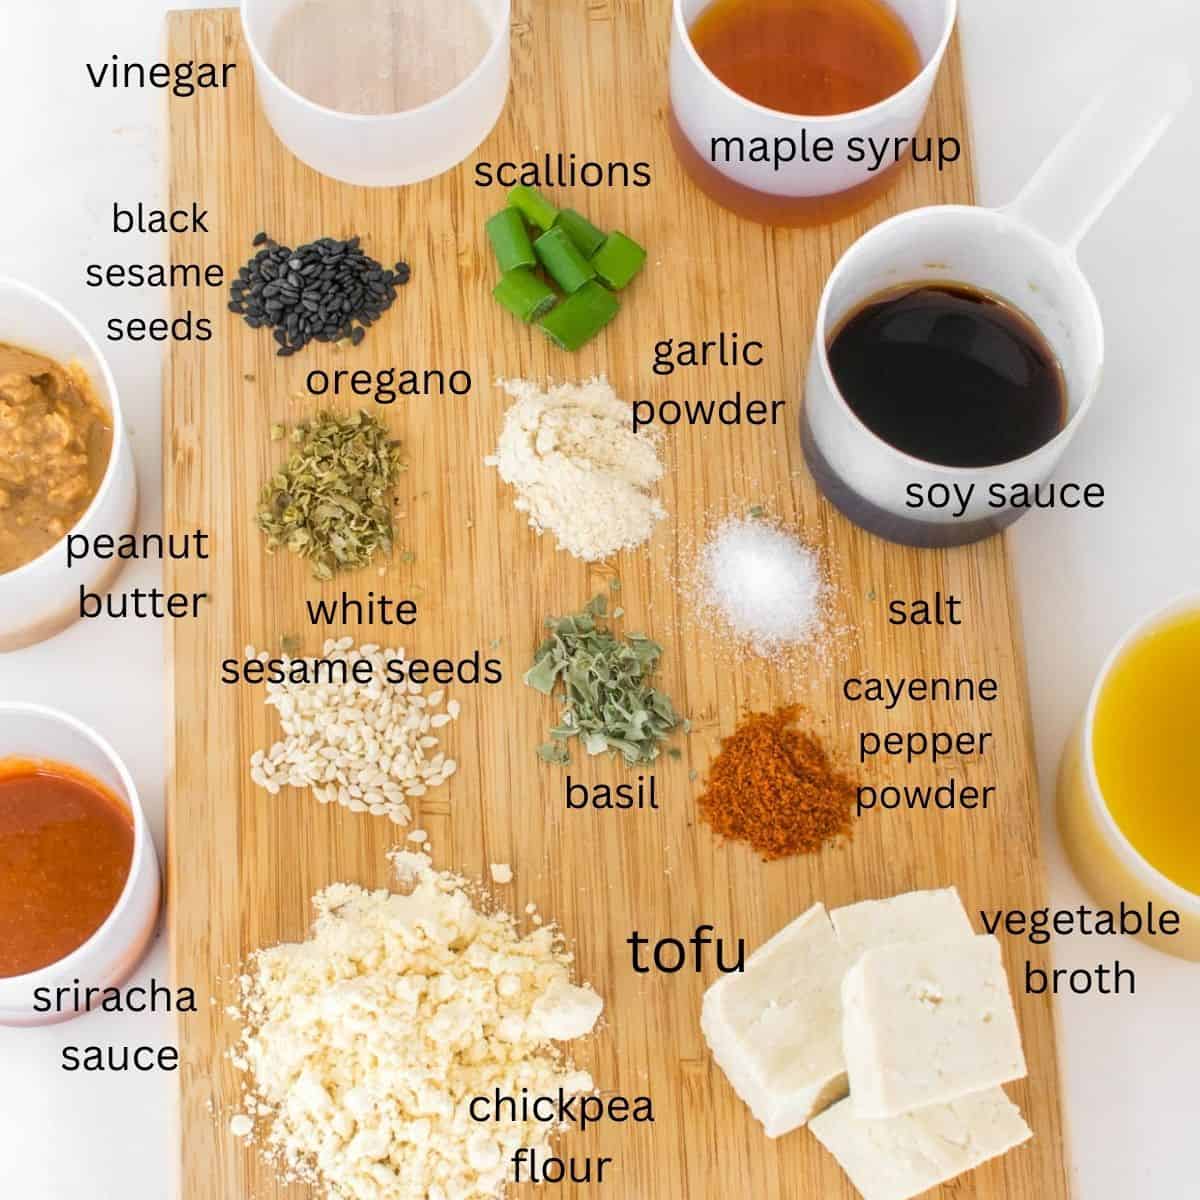 top view of all the ingredients on a wooden board.